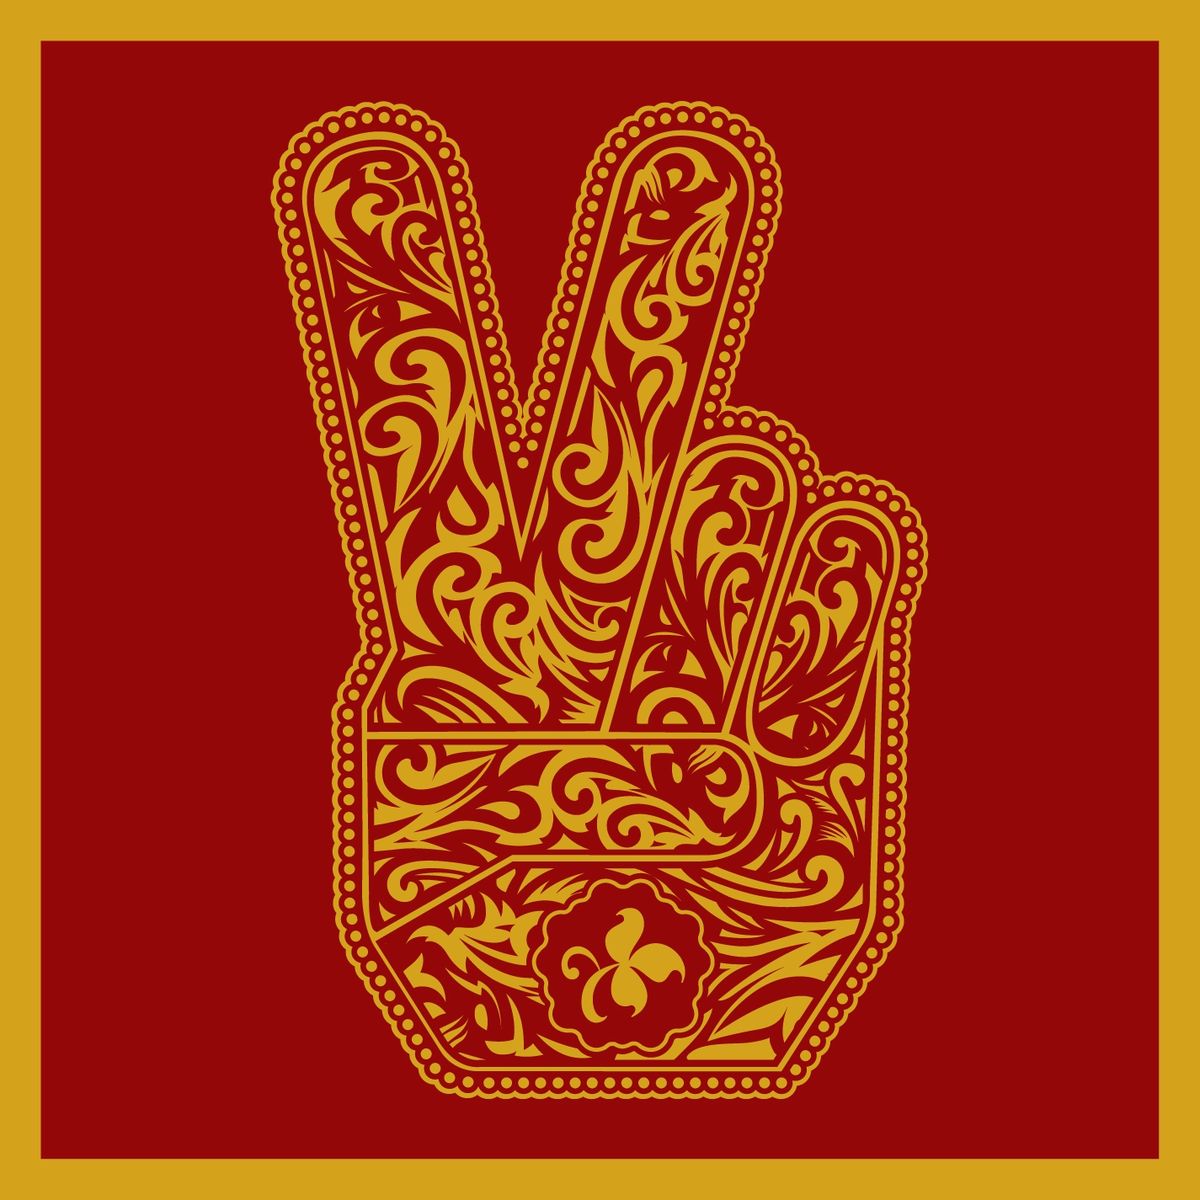 New Stone Temple Pilots material streams online. Plus cover art and